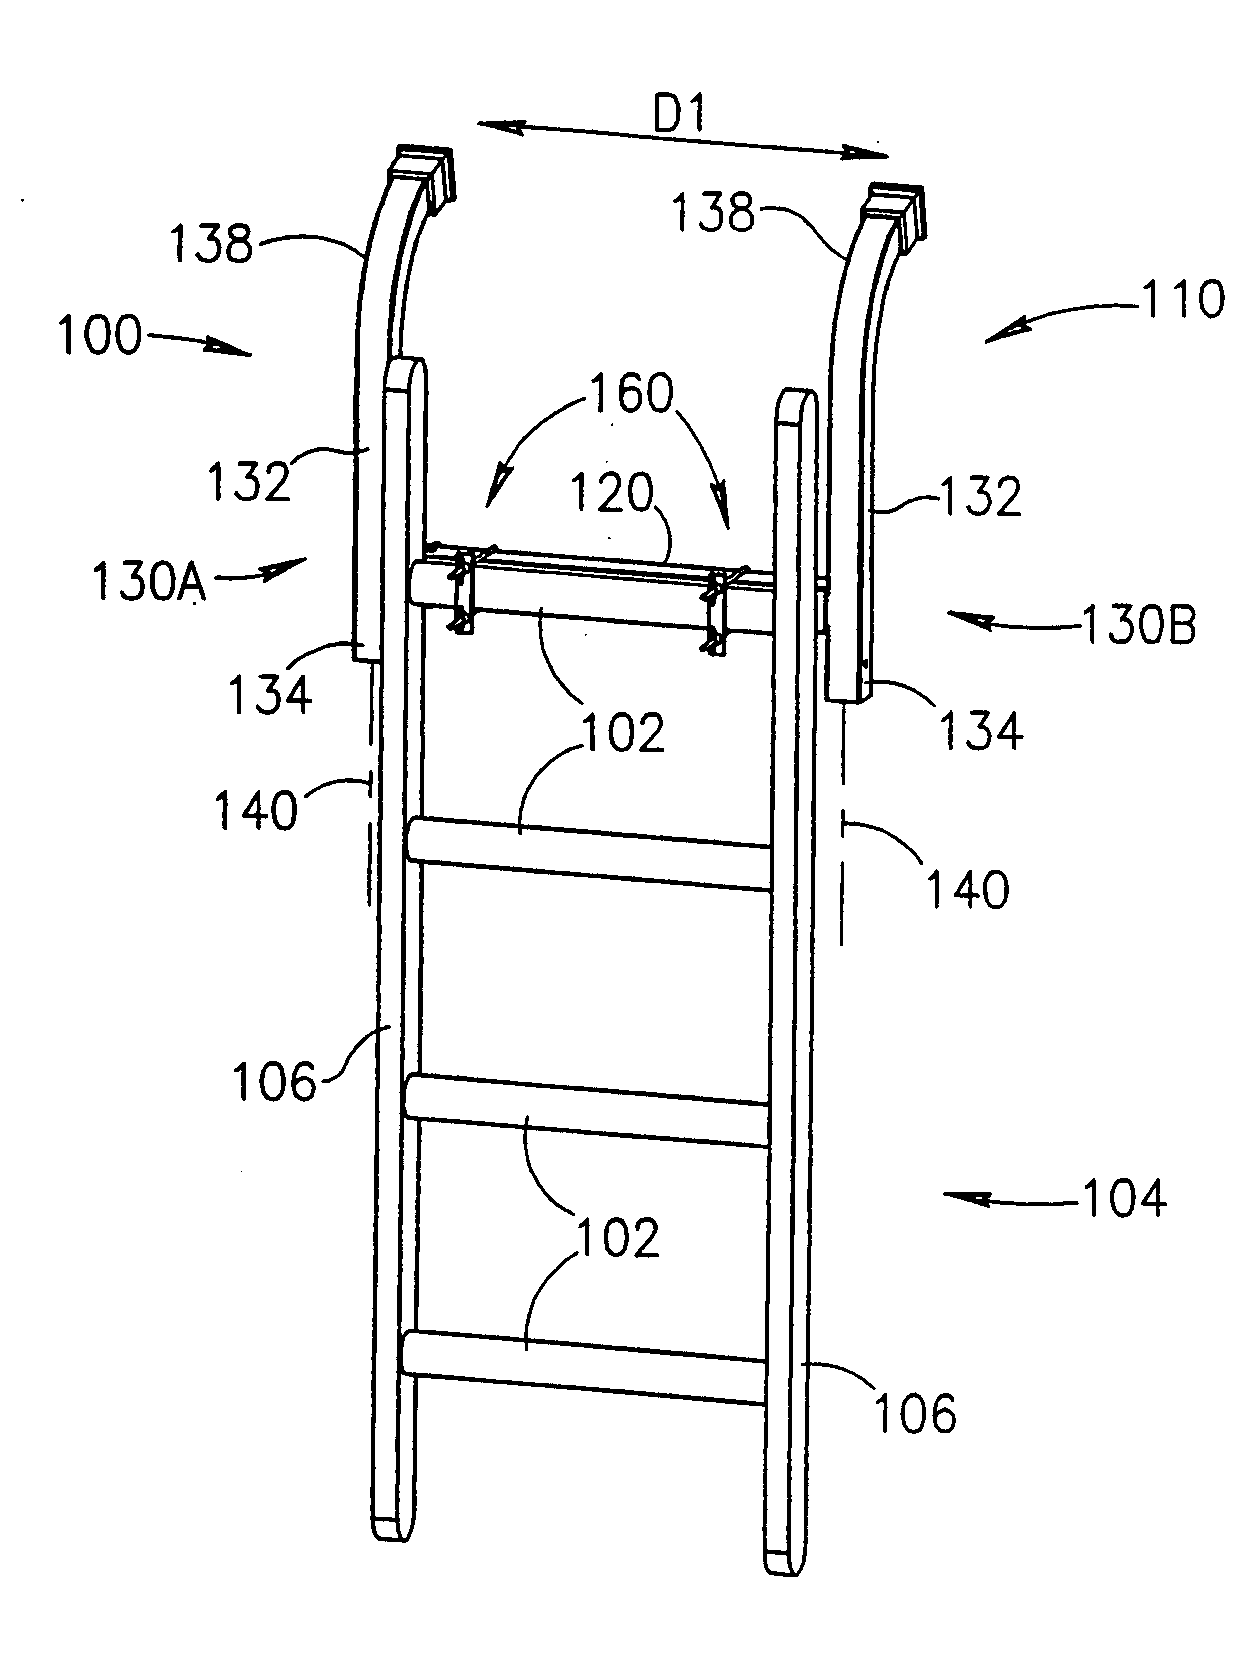 Ladder stabilizer attachment apparatus and methods